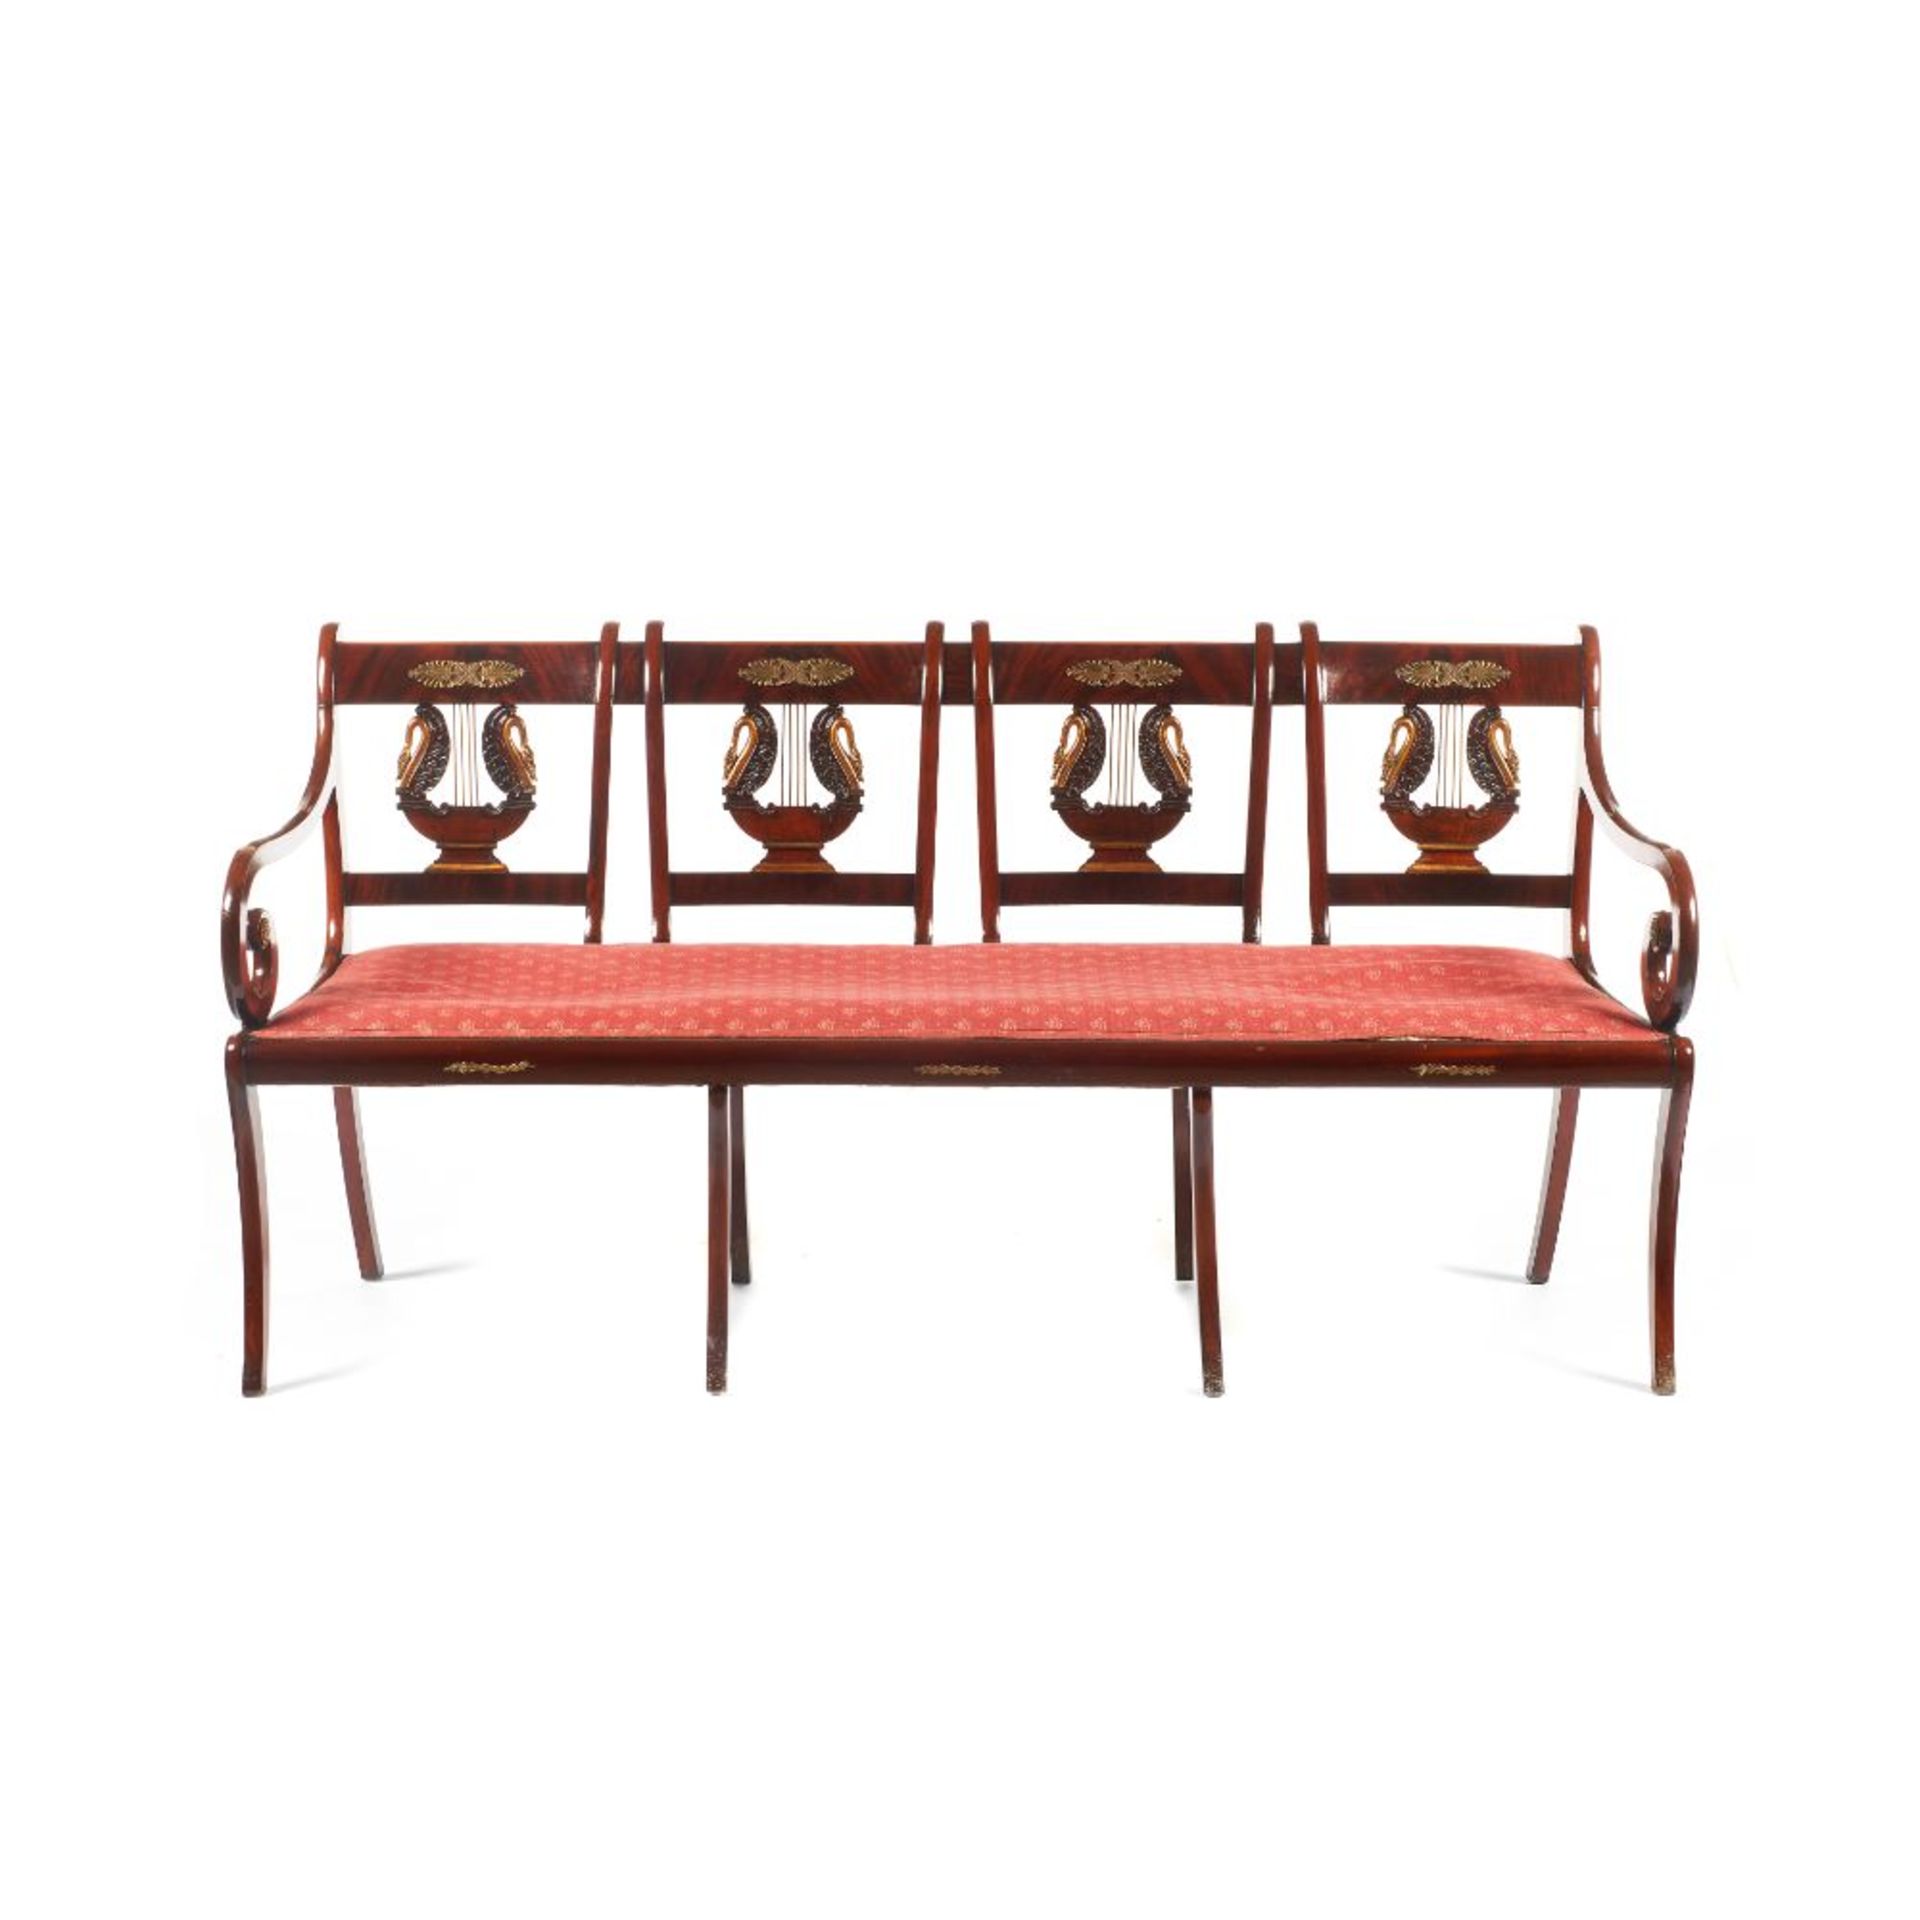 A Four seater settee, Mahogany, Swans carved, pierced and part gilt decoration to backs, Bordeaux